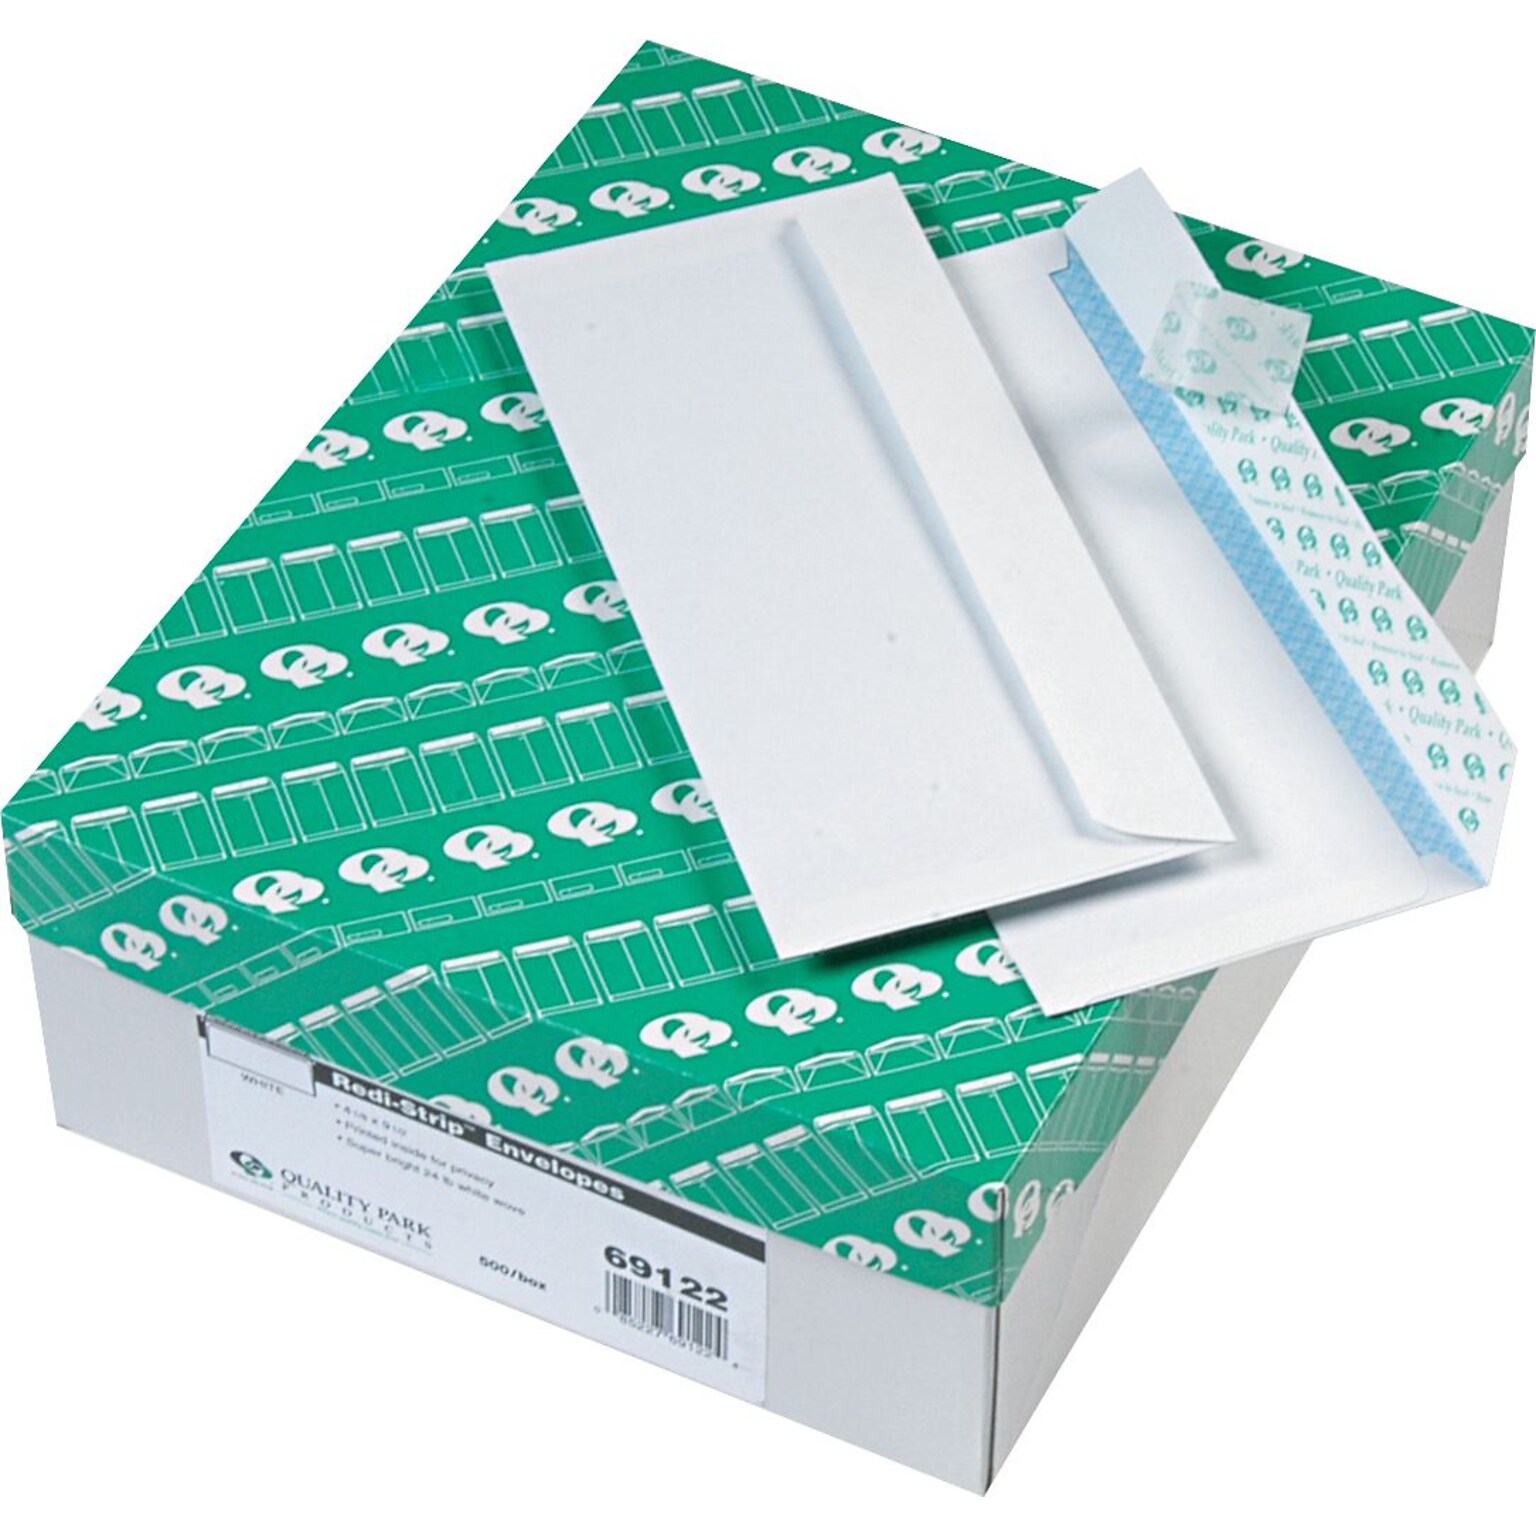 Quality Park Redi-Strip Peel & Seal Security Tinted #10 Business Envelope, 4 1/8 x 9 1/2, White Wove, 500/Box (69122)